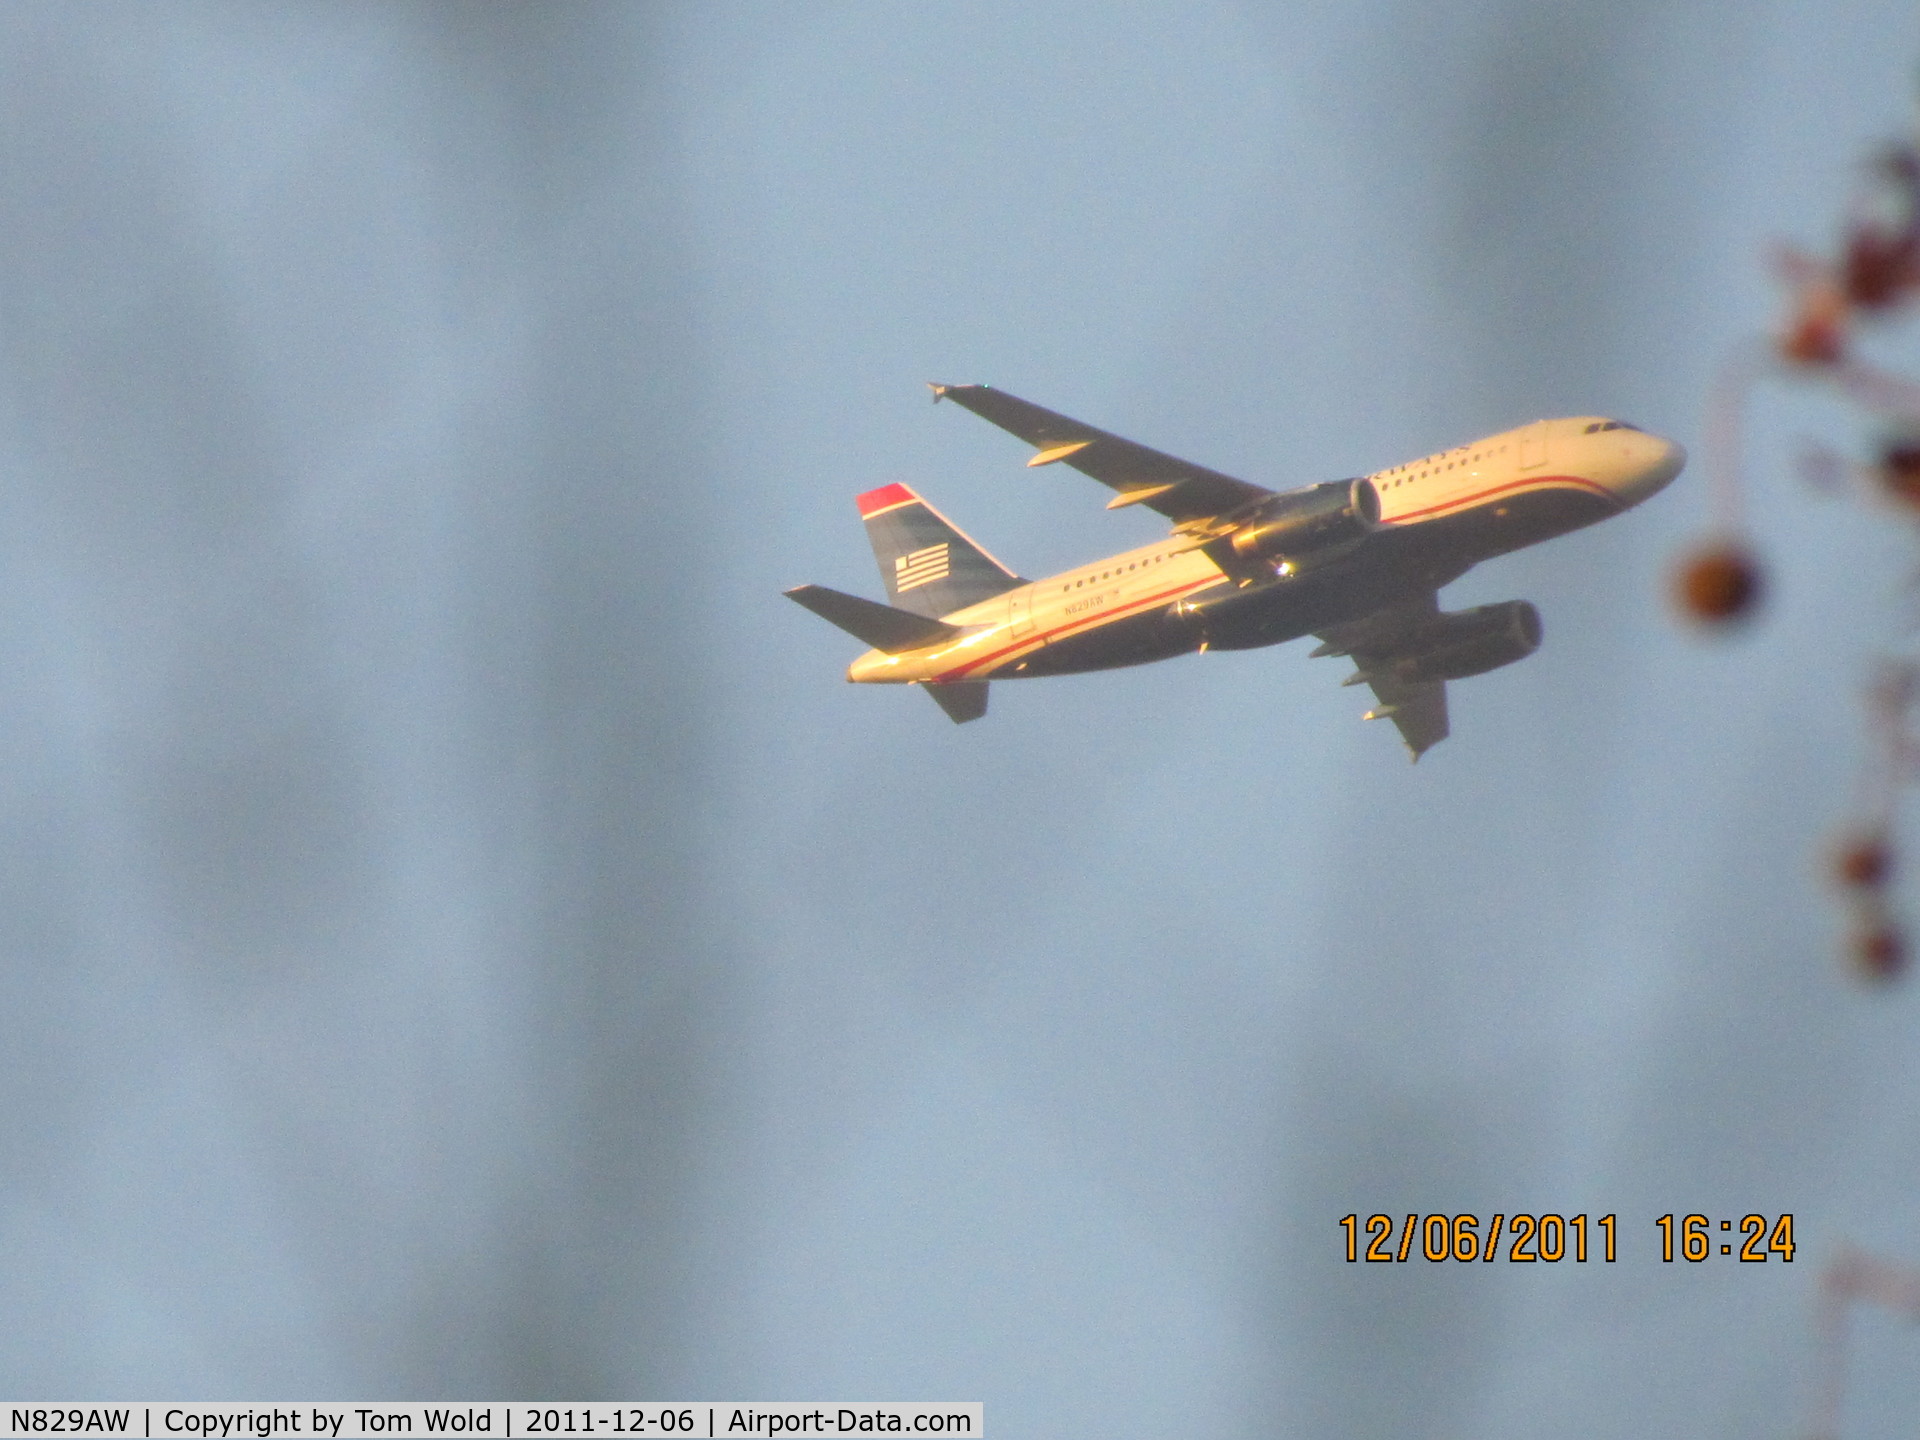 N829AW, 2001 Airbus A319-132 C/N 1563, Took this photo of N829AW flying over the Sacramento Ca. area on 12/06/2o11 at 4:24 pm California time.